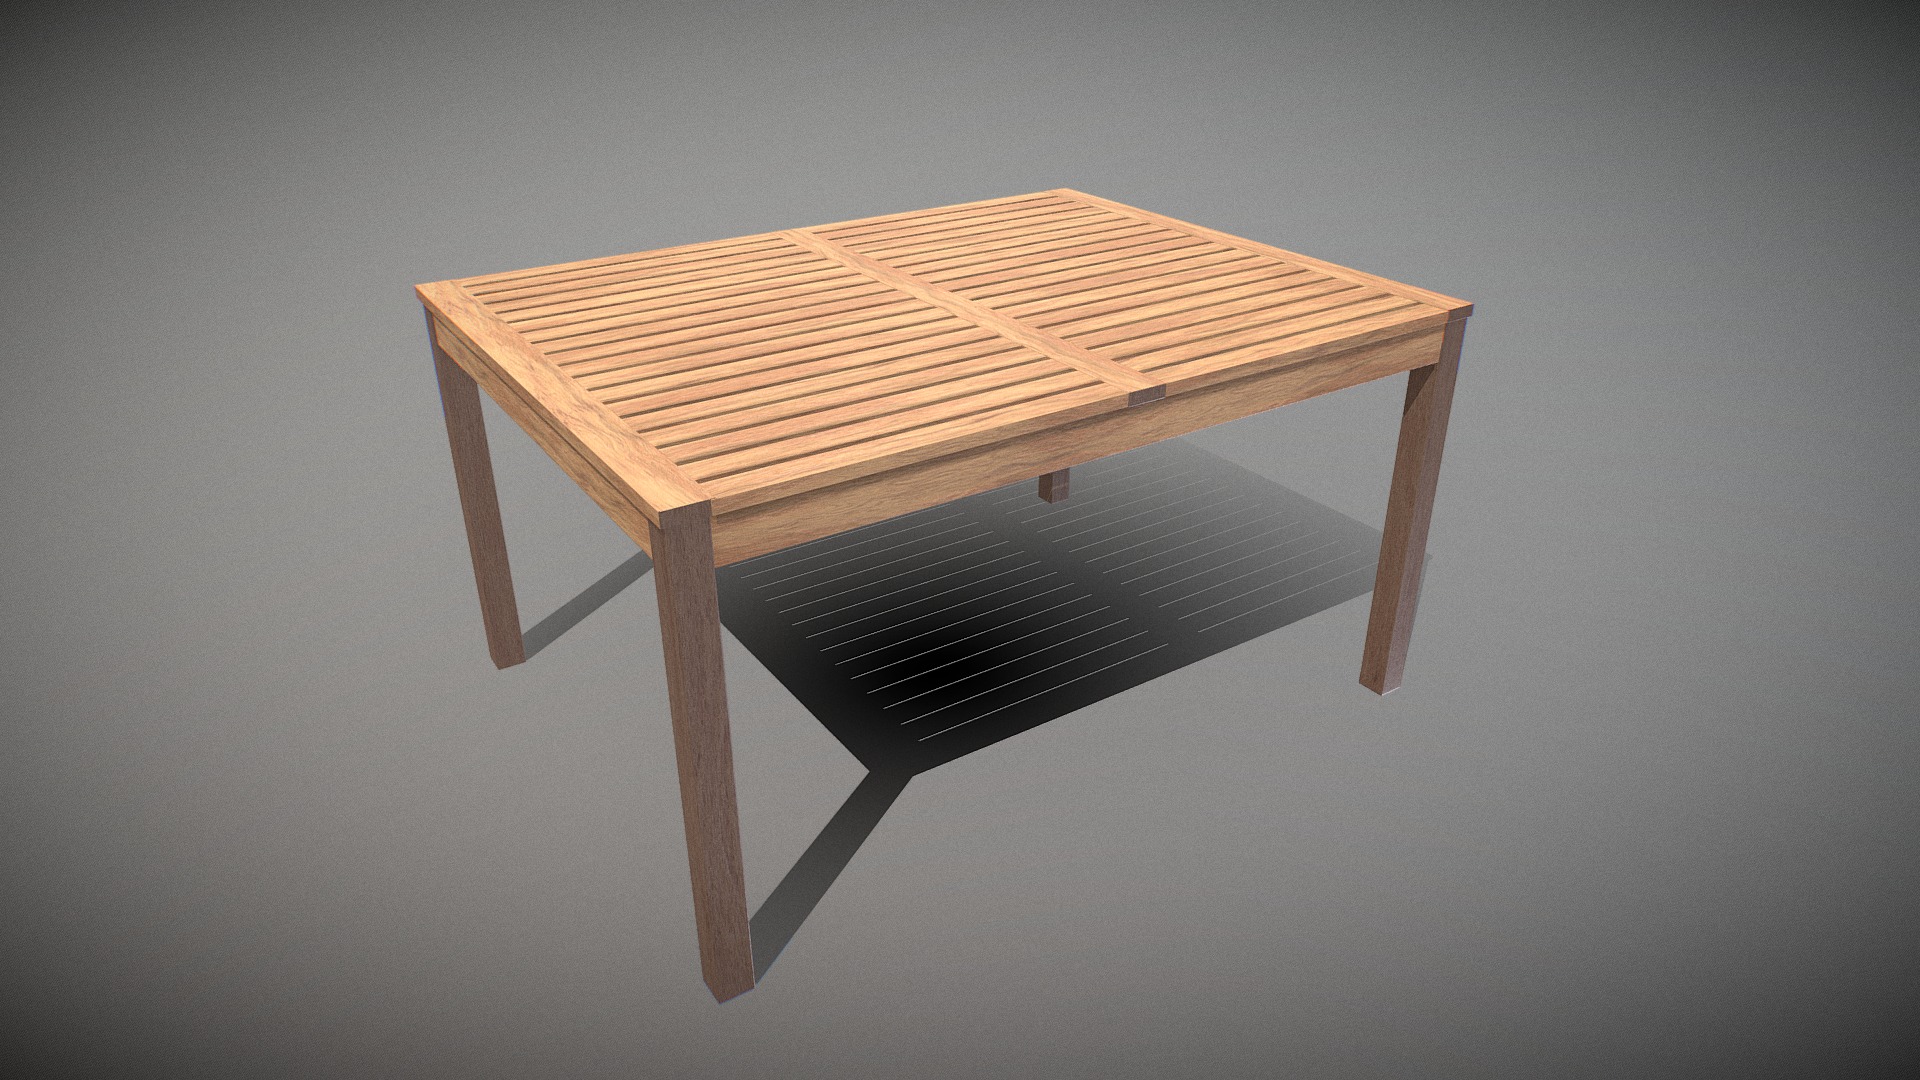 3D model Table wooden 07 - This is a 3D model of the Table wooden 07. The 3D model is about a wooden table with a bench.